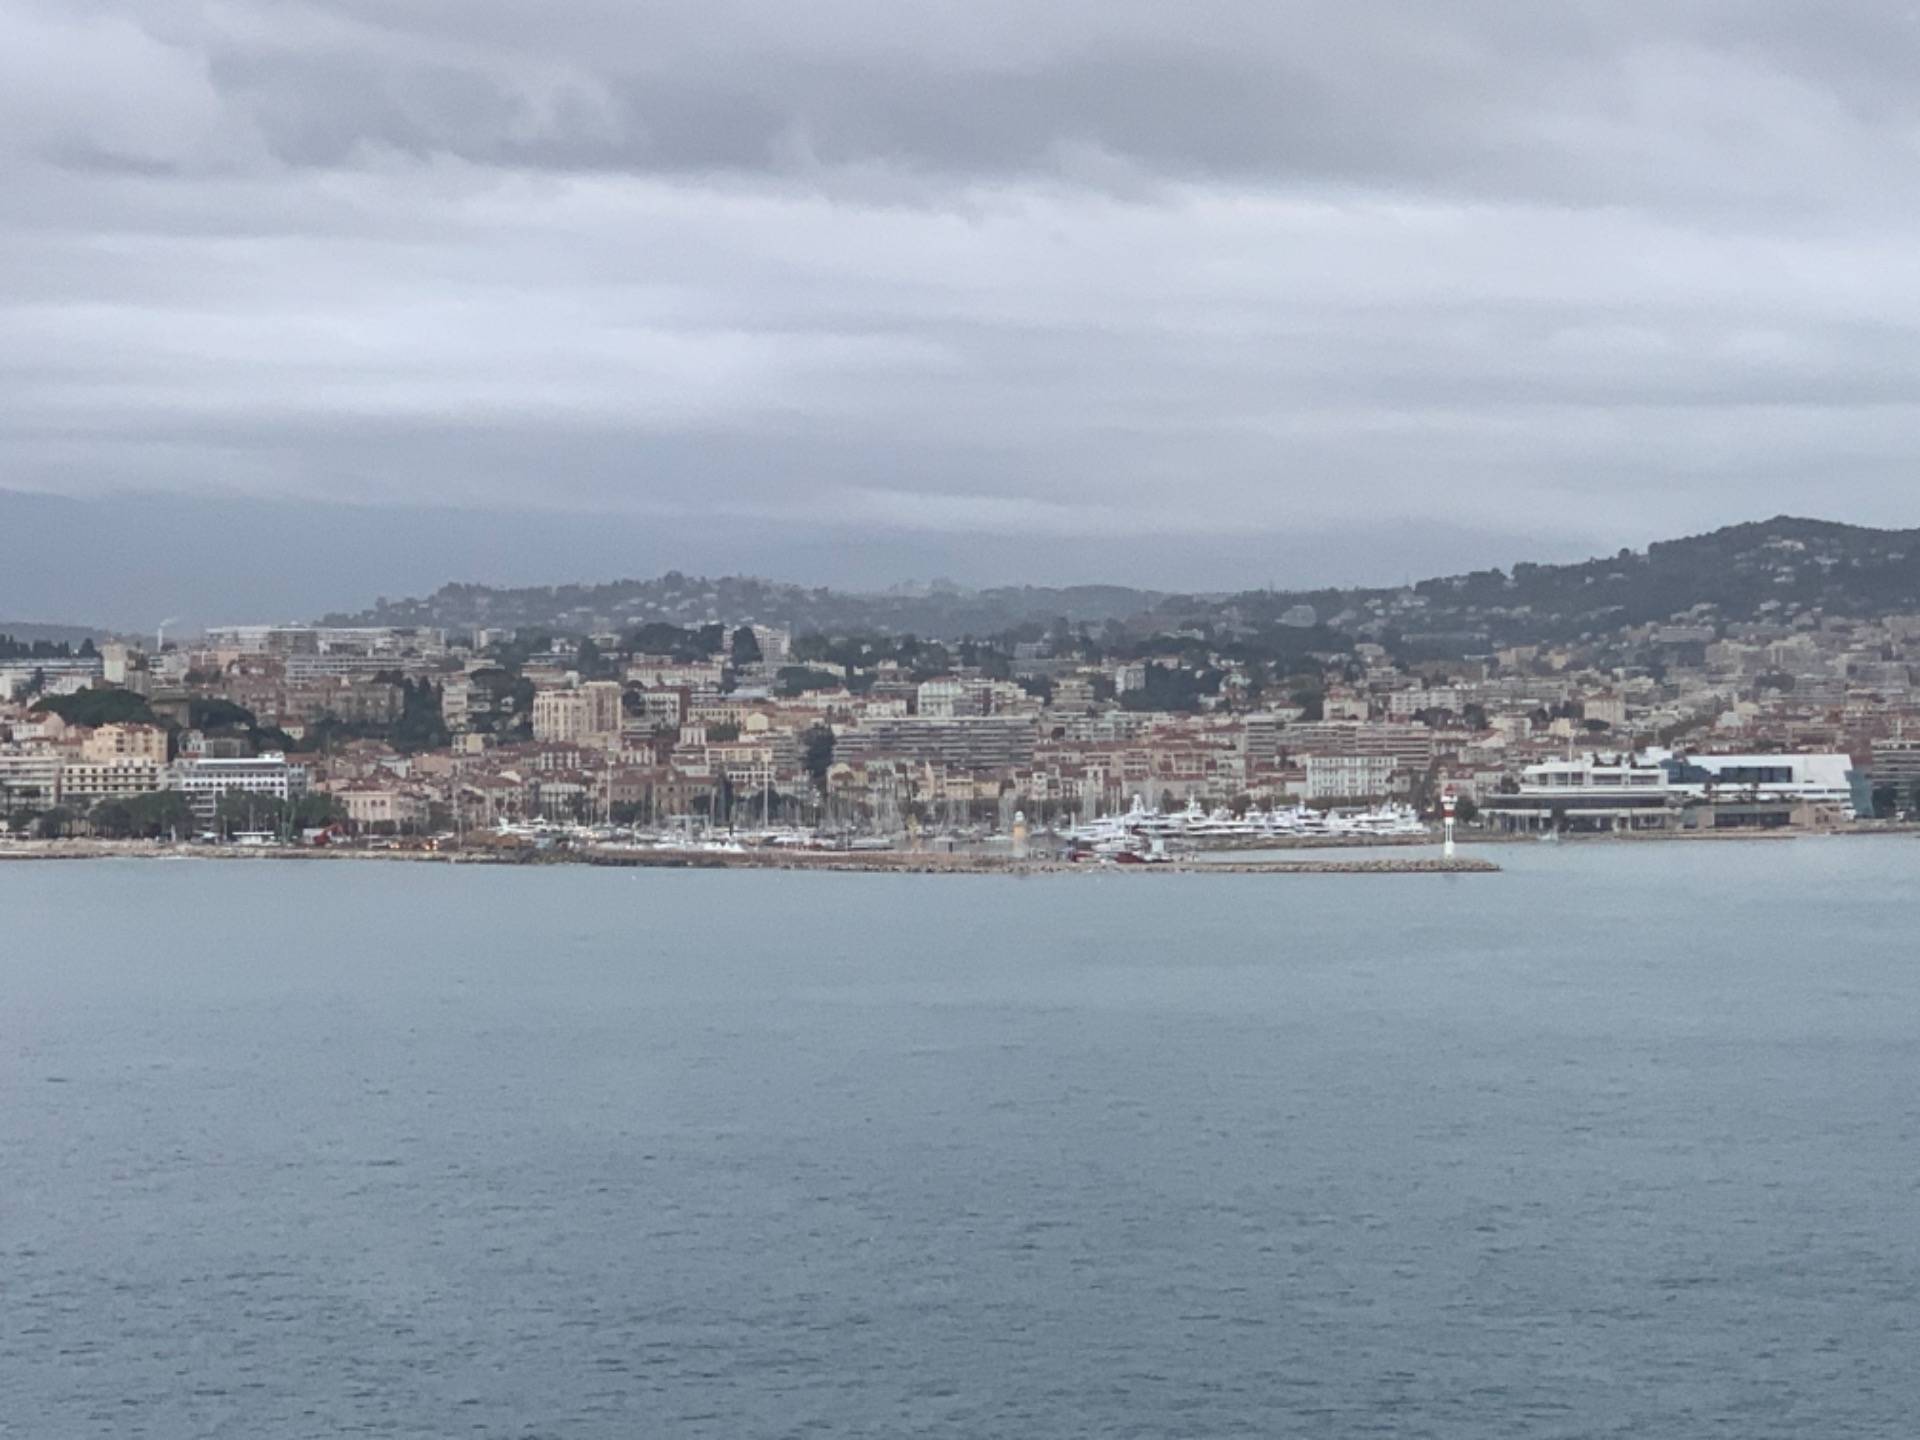 # Cannes is a bit cloudy